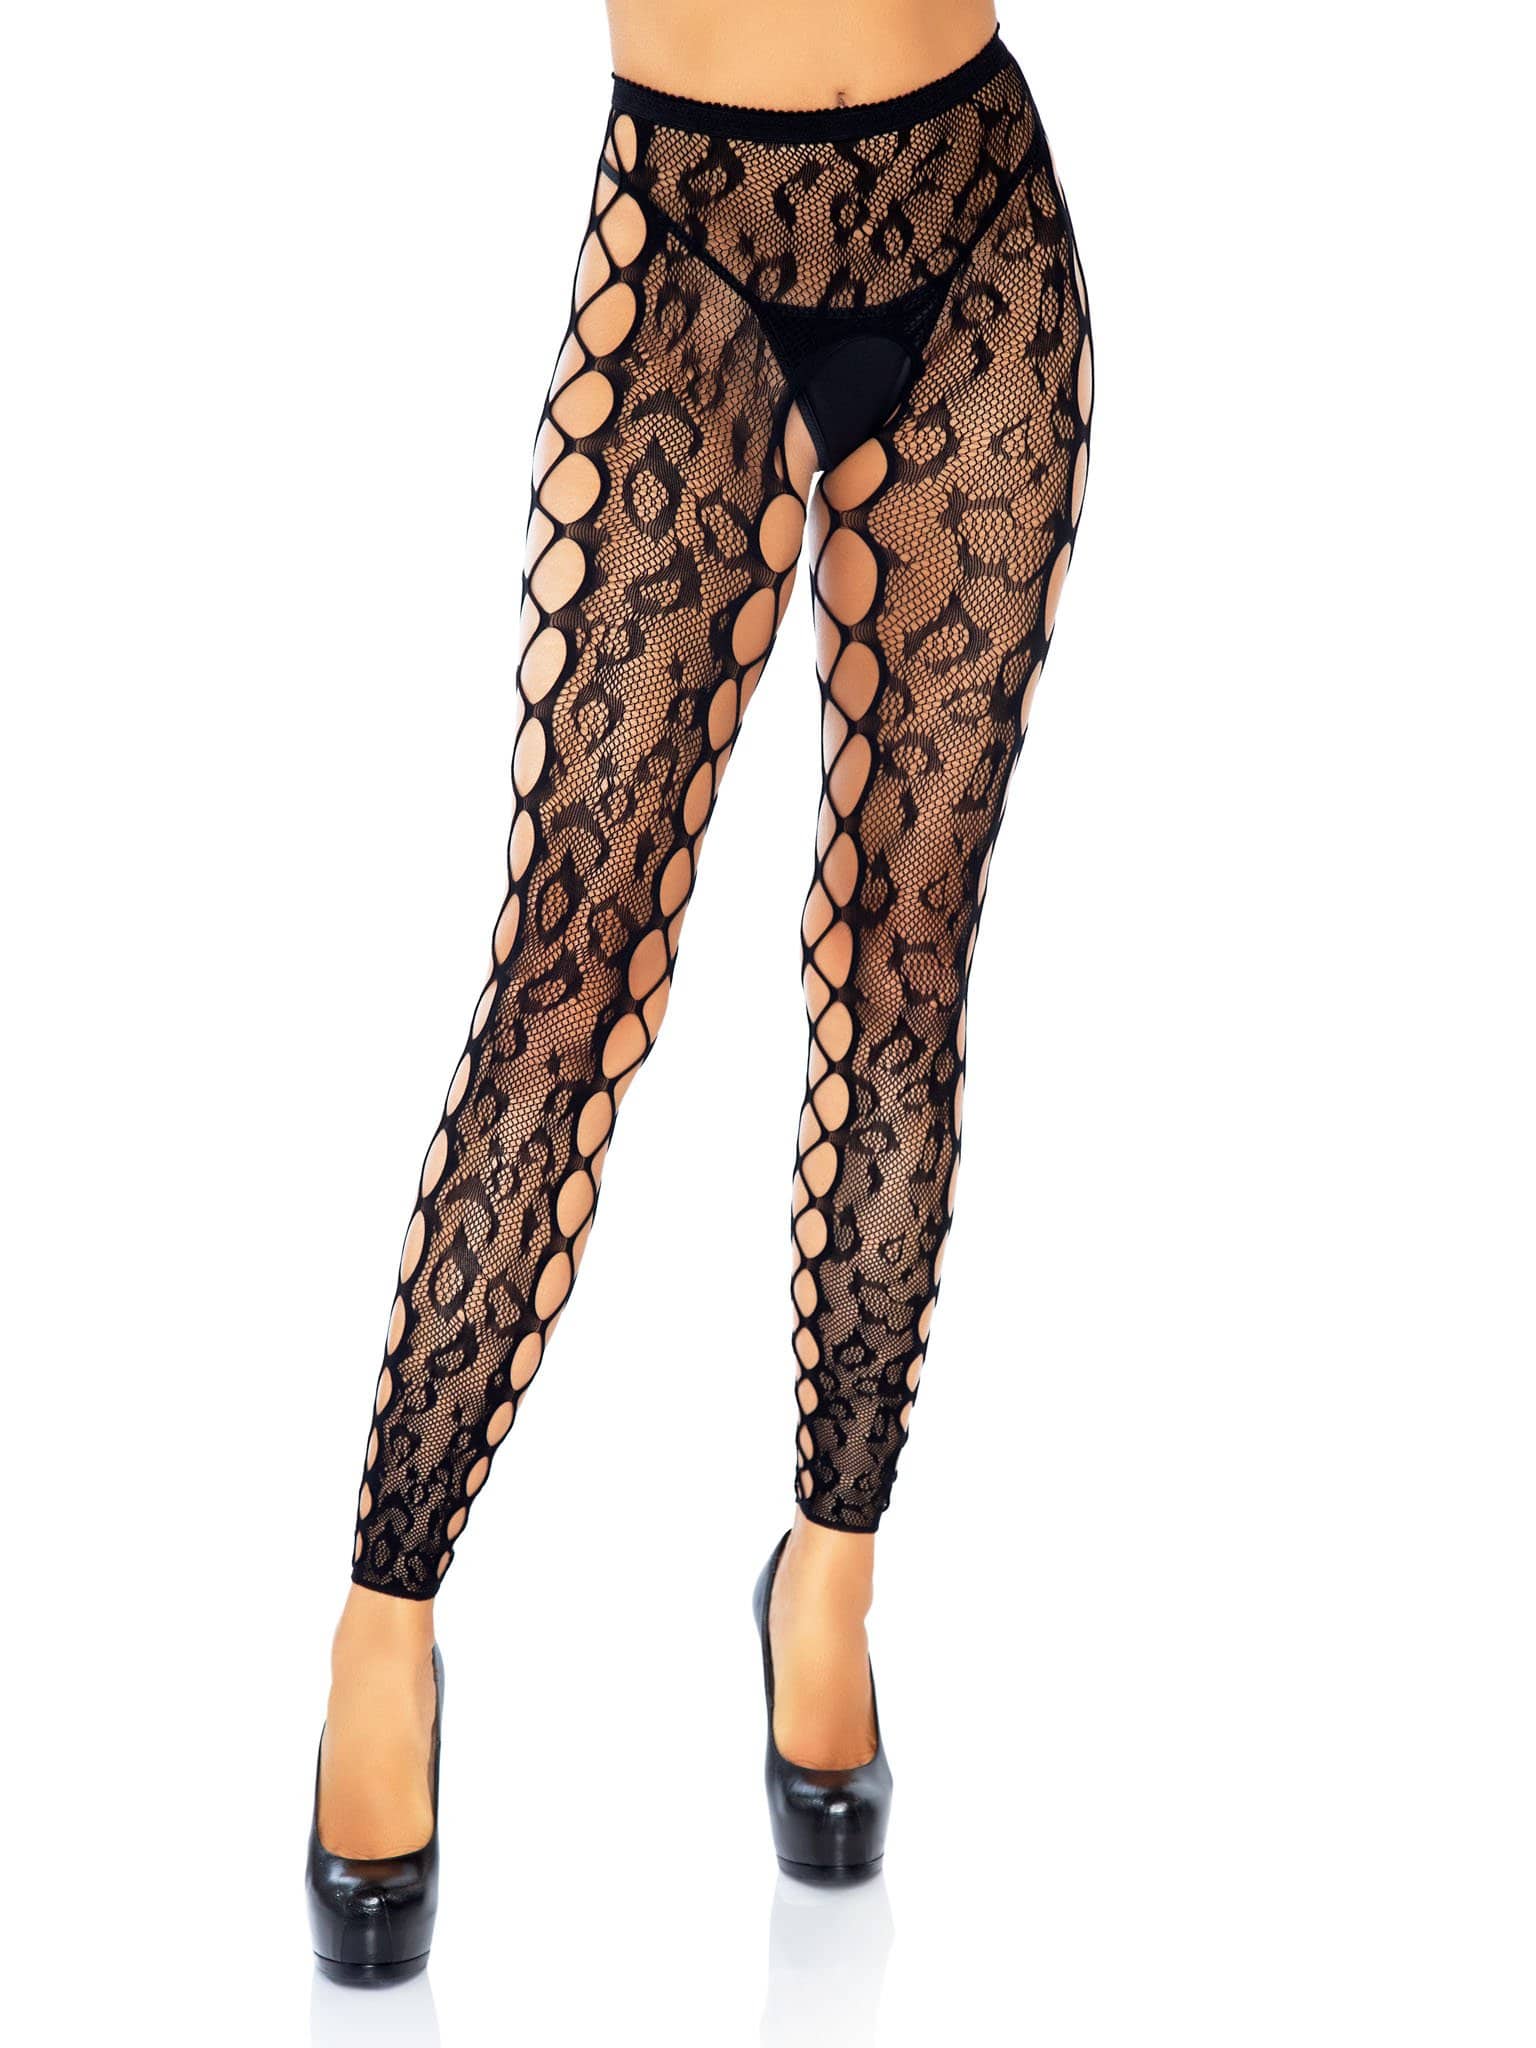 Leg Avenue Leopard Lace Footless Crotchless Hosiery Tights – Pixie